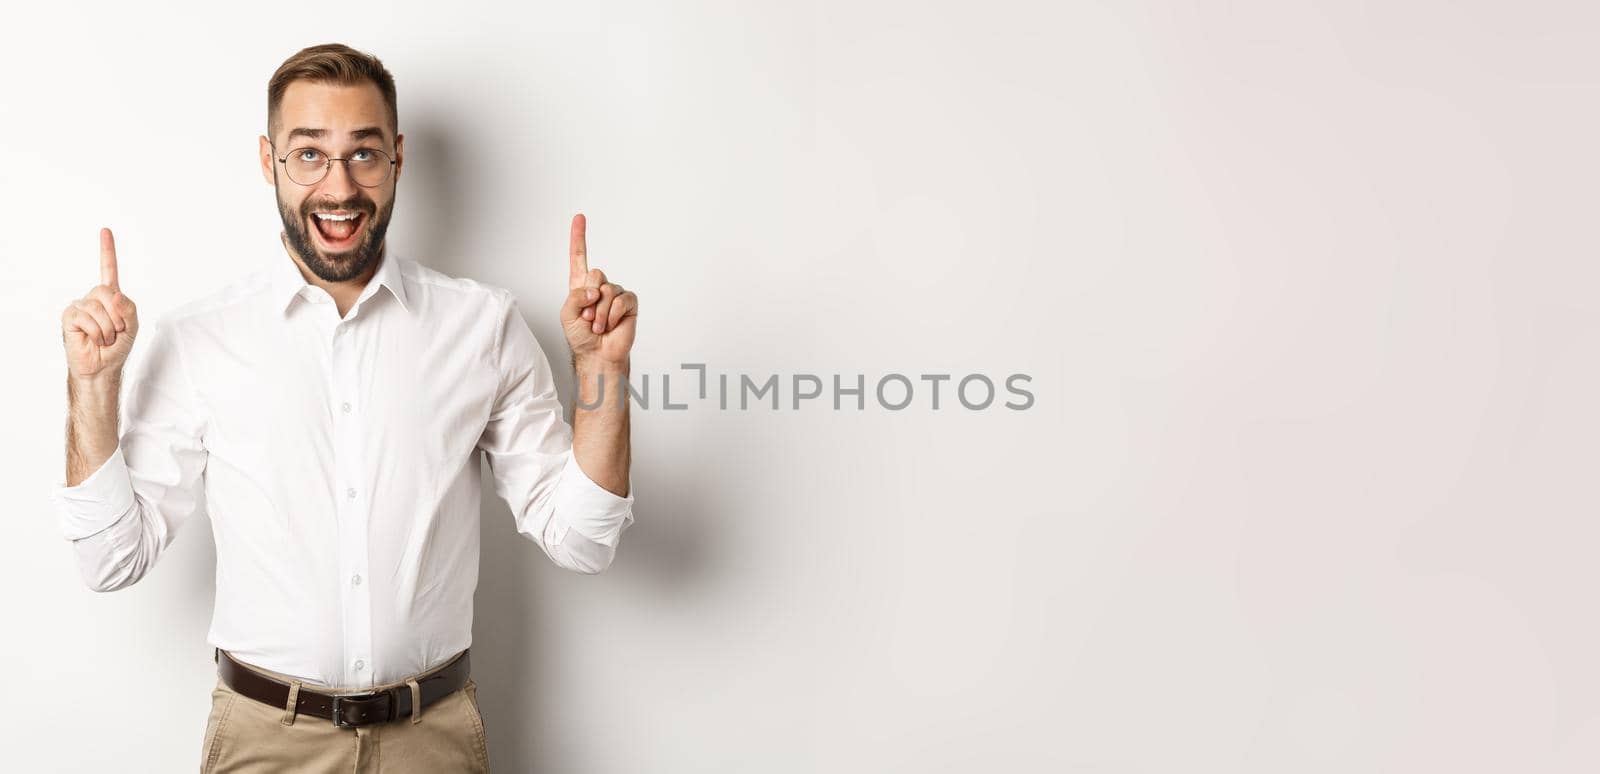 Excited businessman checking out advertisement, pointing and looking up with happy face, standing against white background.